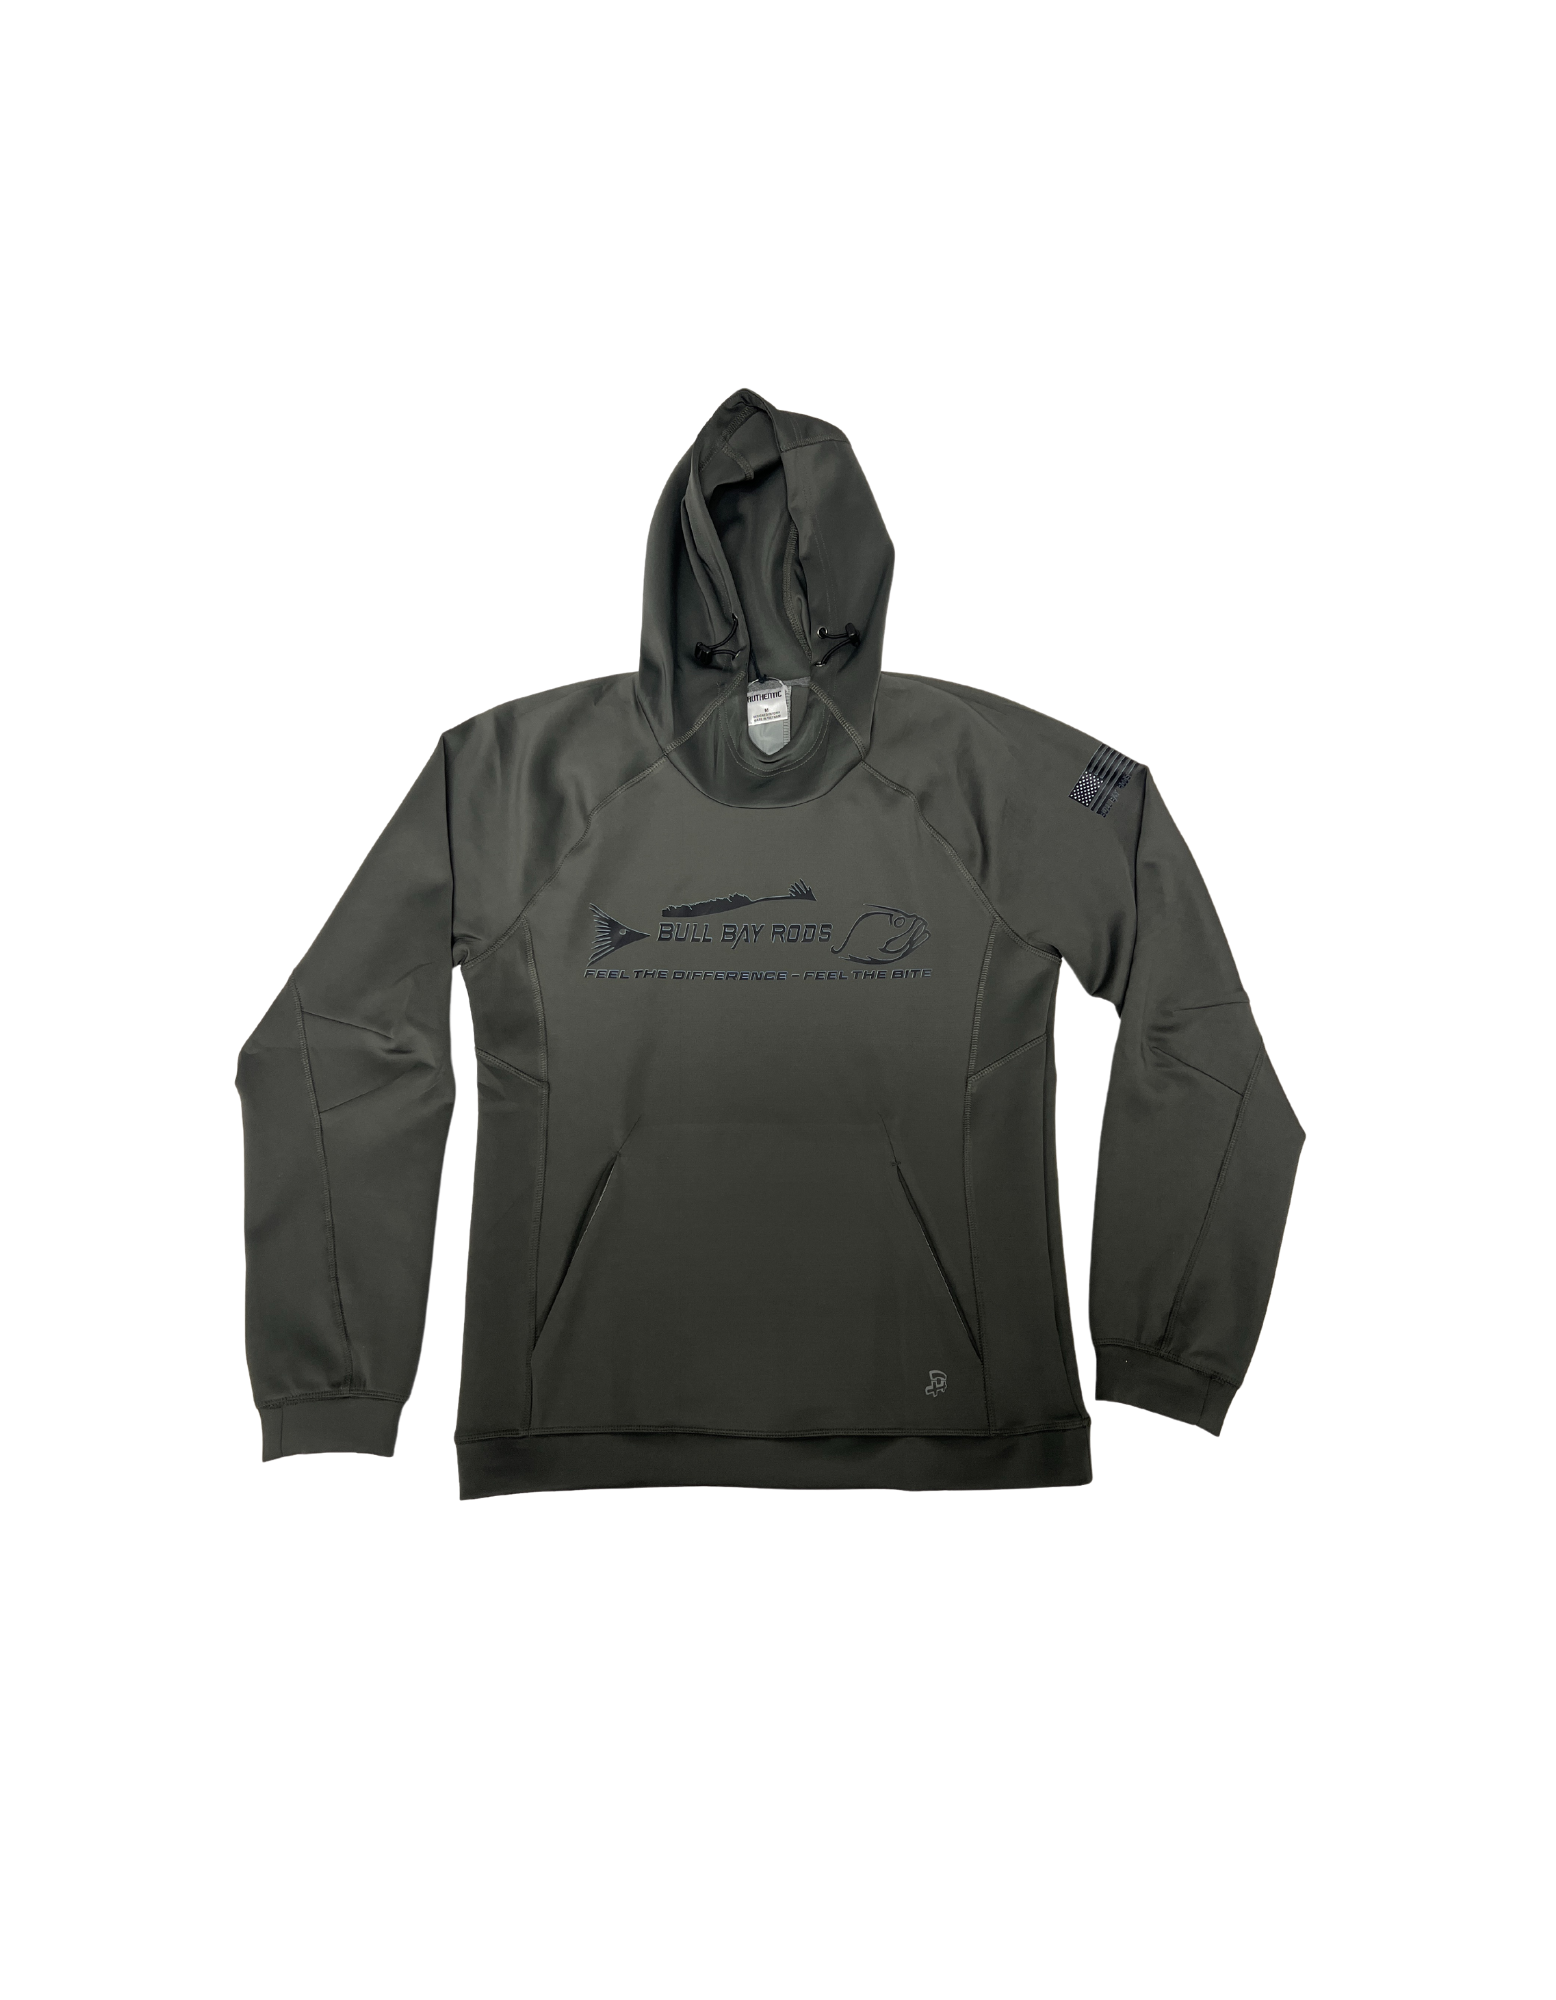 Bull Bay High Performance Hoodie Athletic Fit